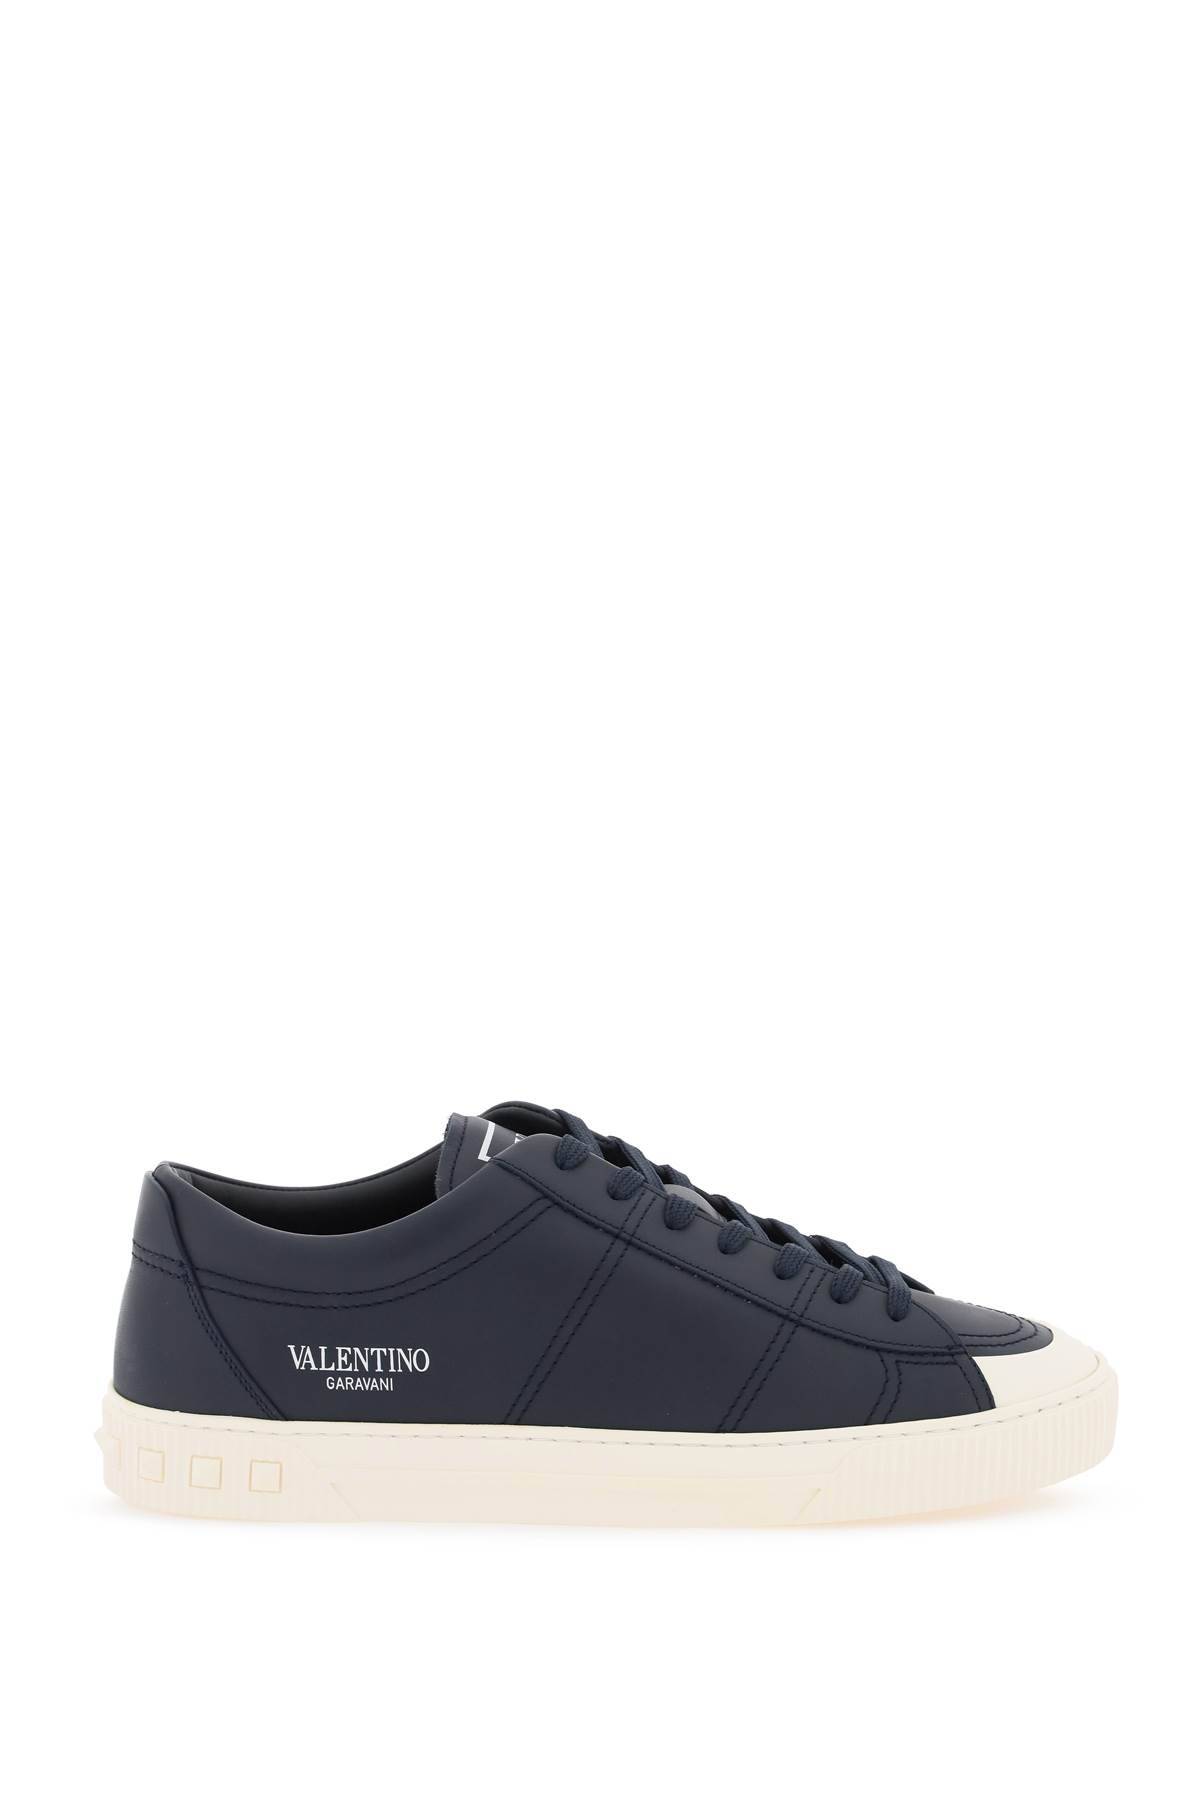 Shop Valentino Leather Cityplanet Sneakers In Black